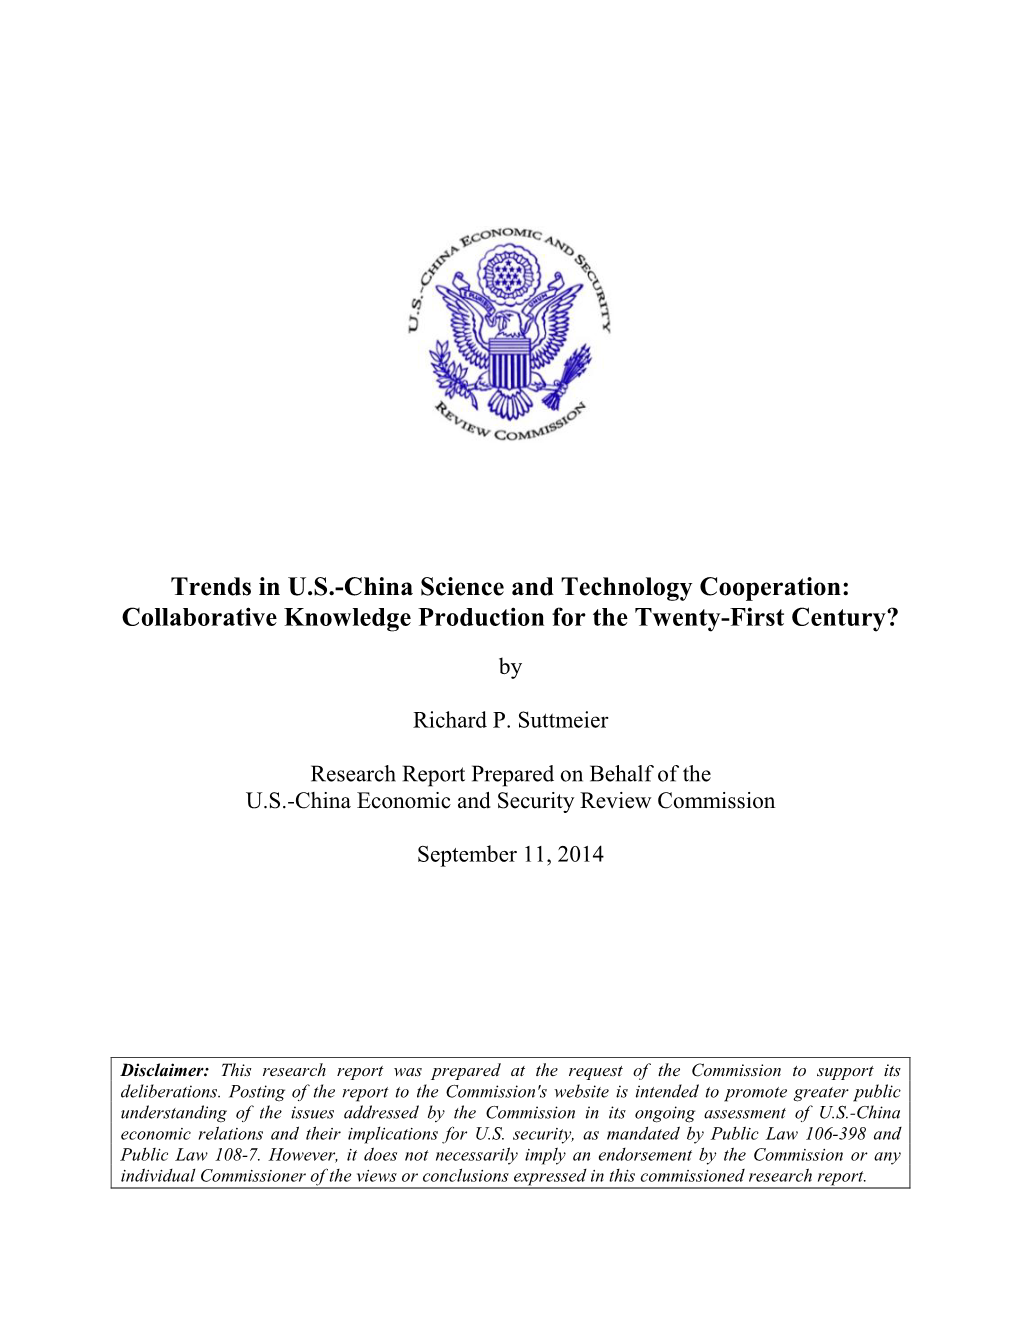 Trends in US-China Science and Technology Cooperation